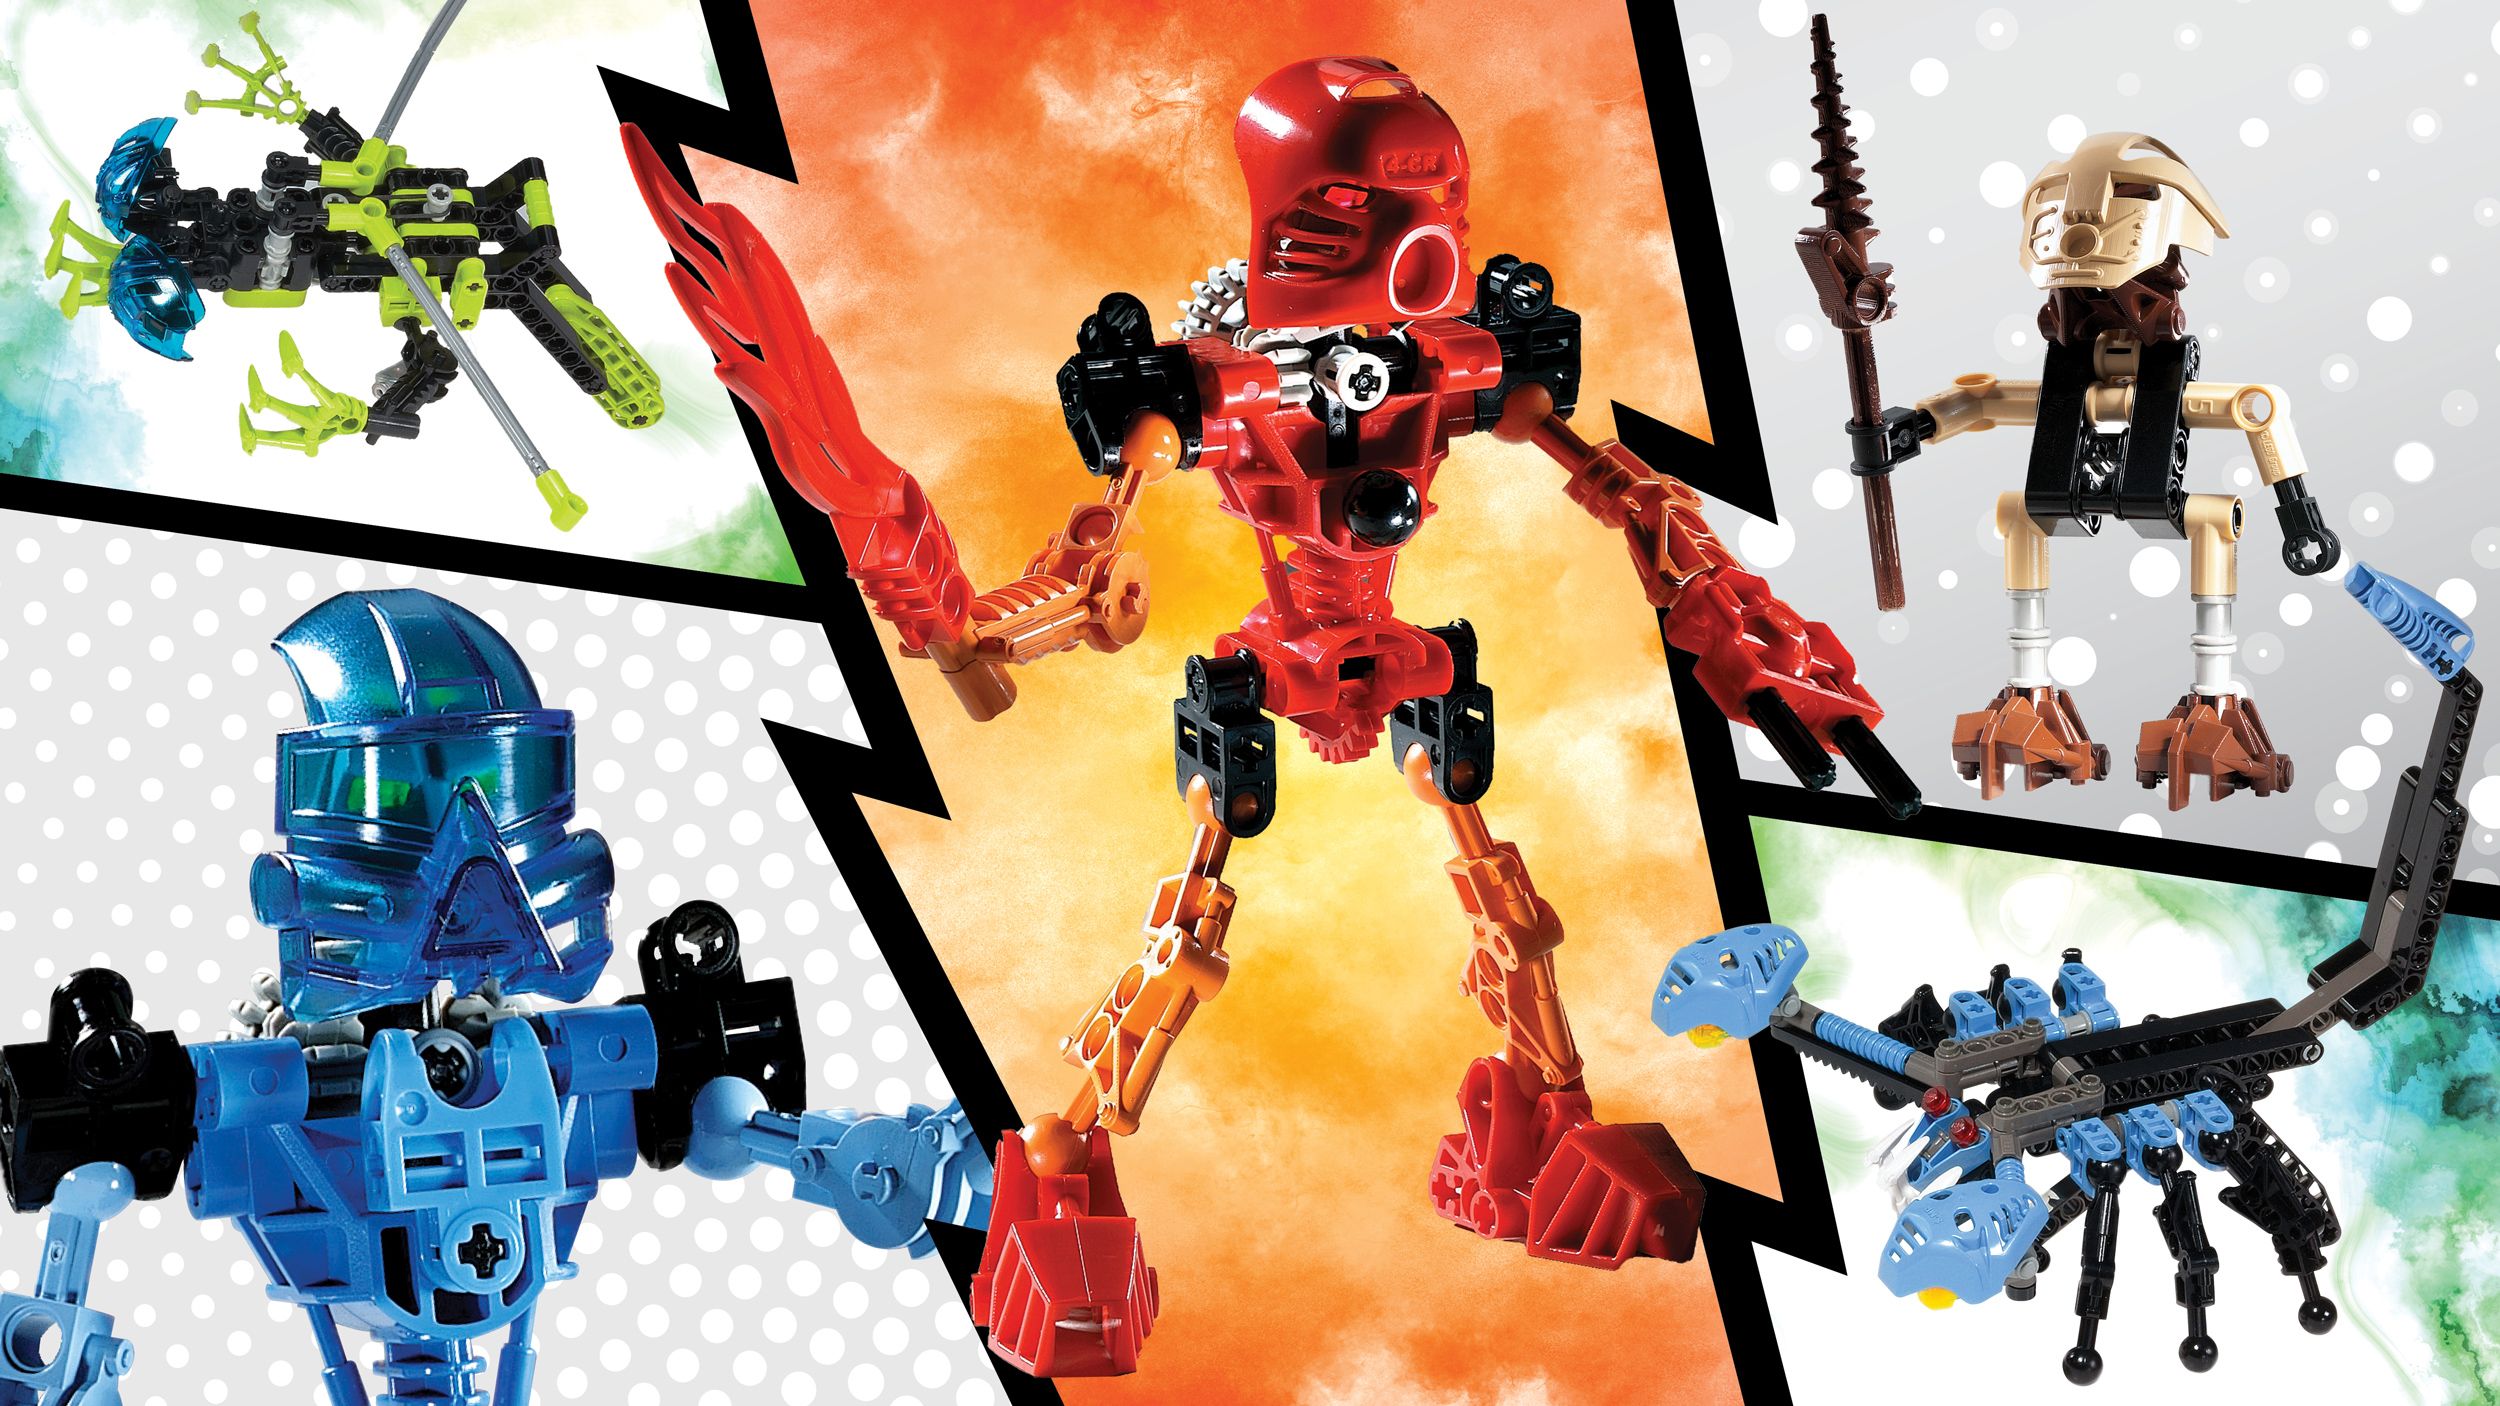 The Story of LEGO Bionicle